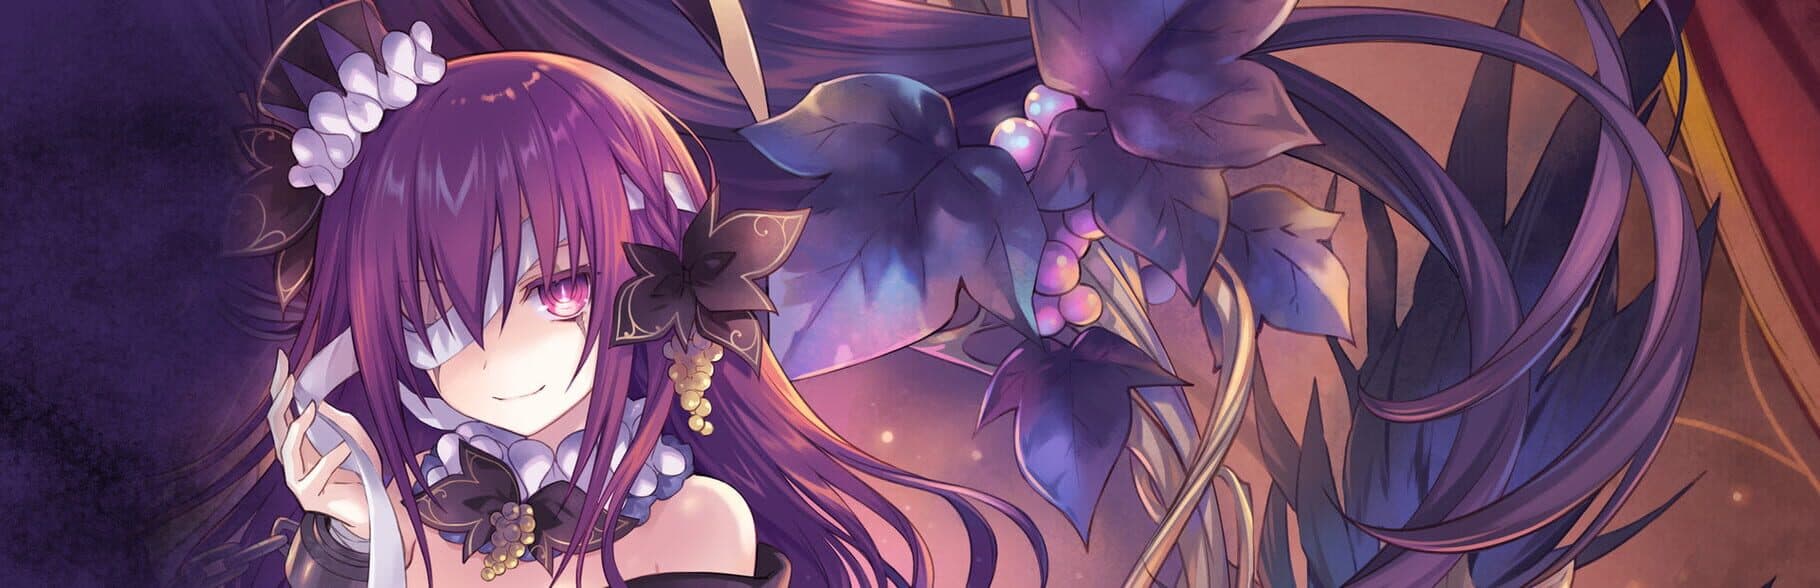 Date A Live: Ren Dystopia Image